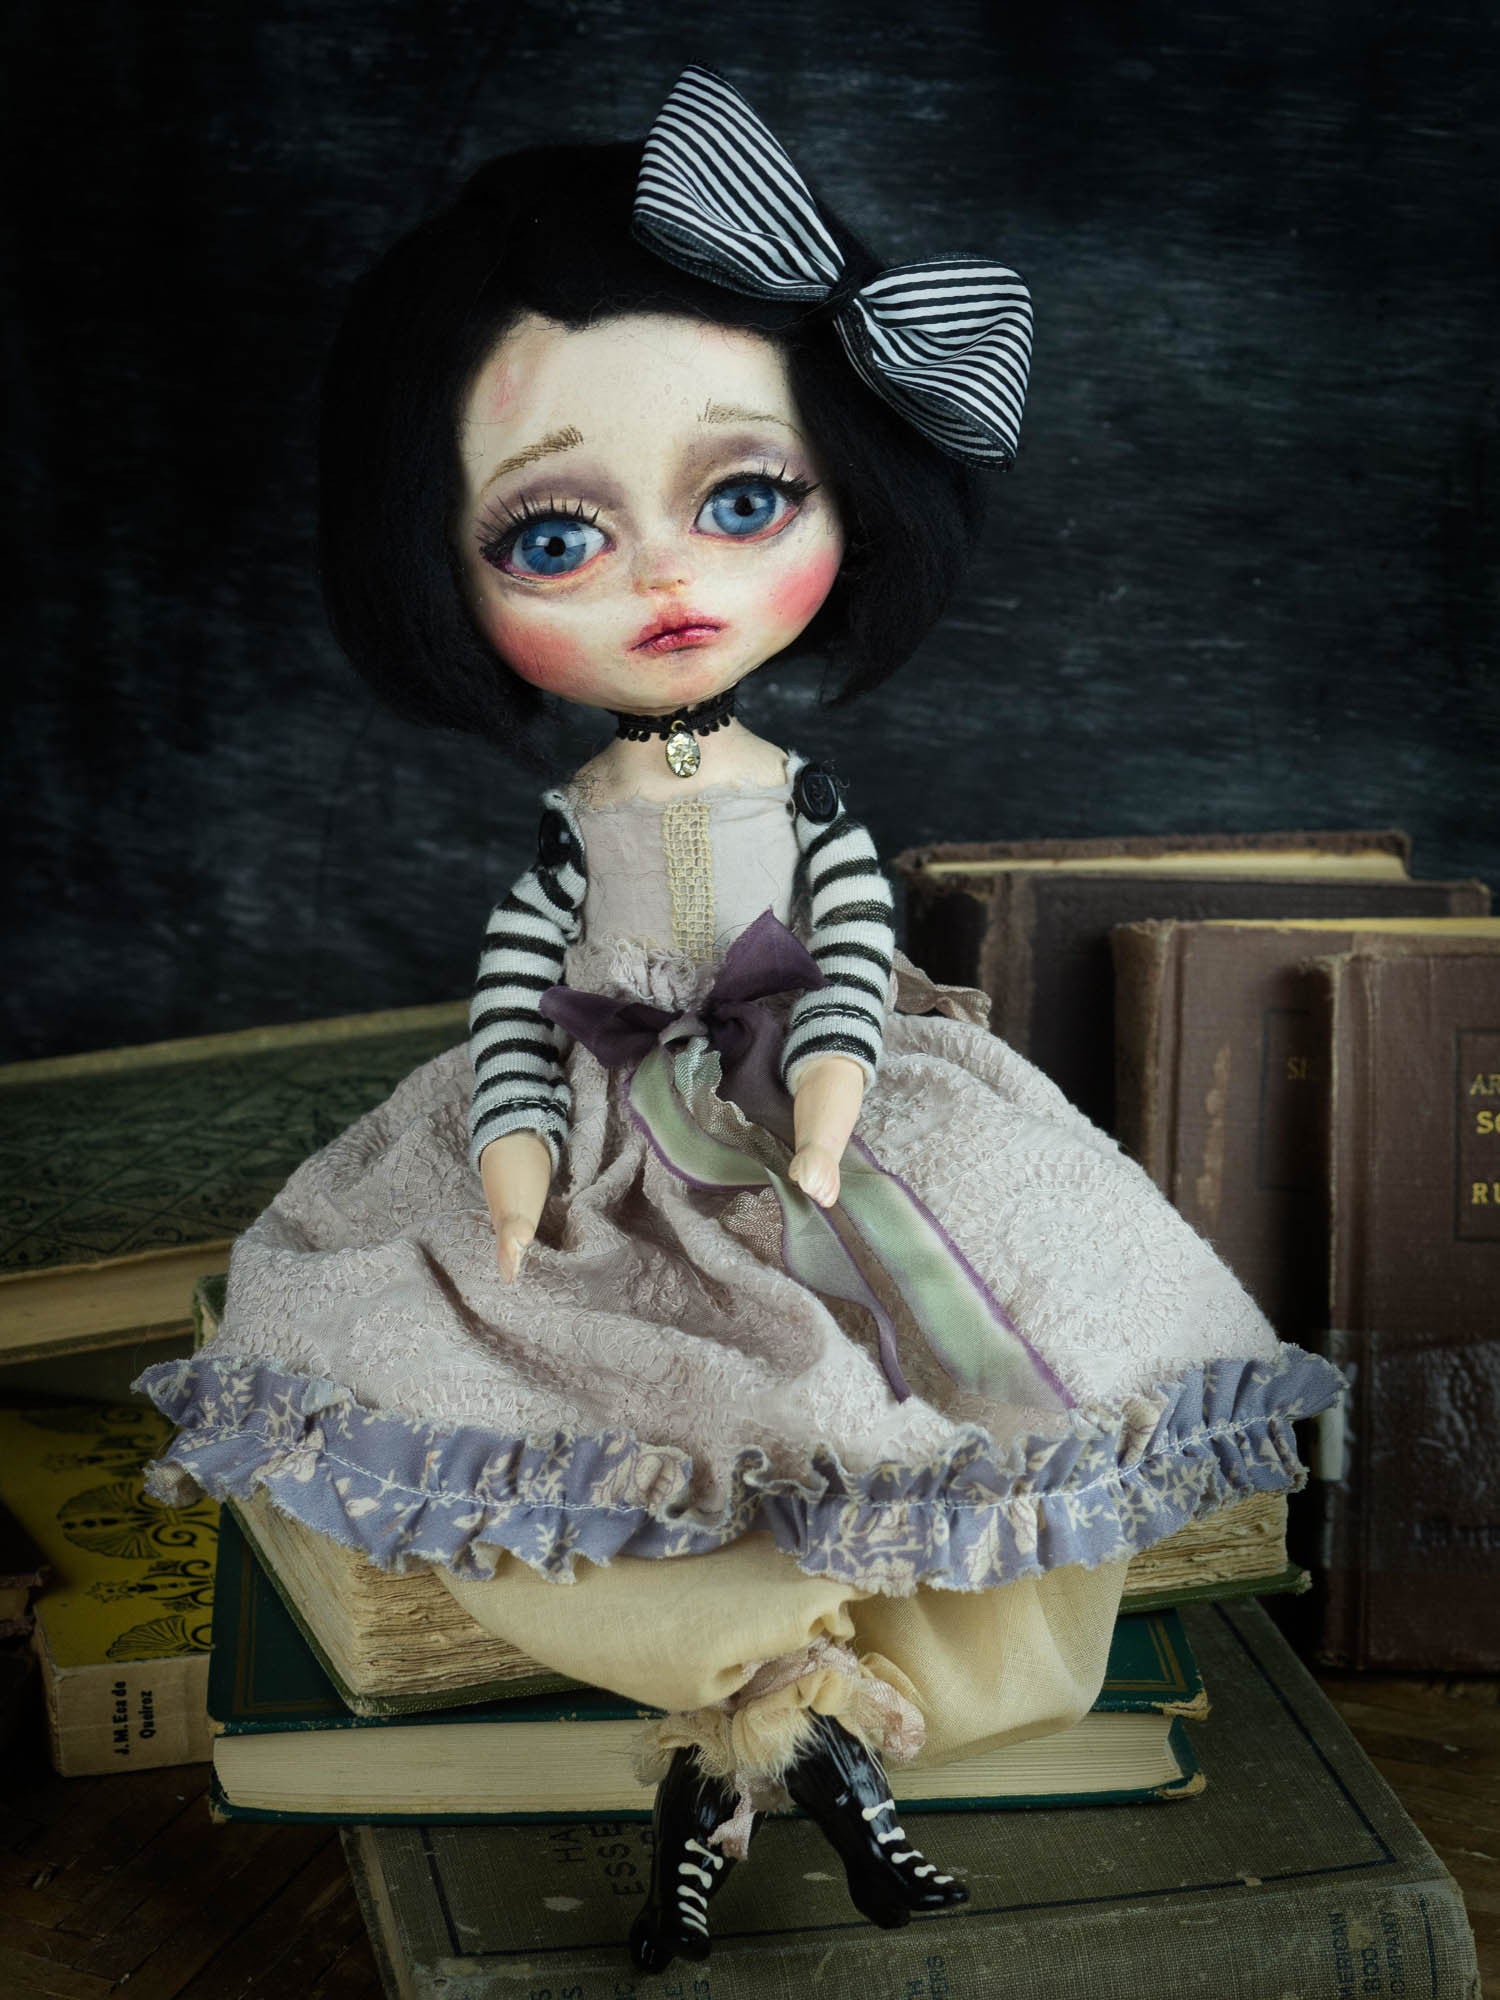 Danita makes amazing handcrafted art dolls with her secrets for dollmaking techniques. See the details she gives to their lifelike art dolls.